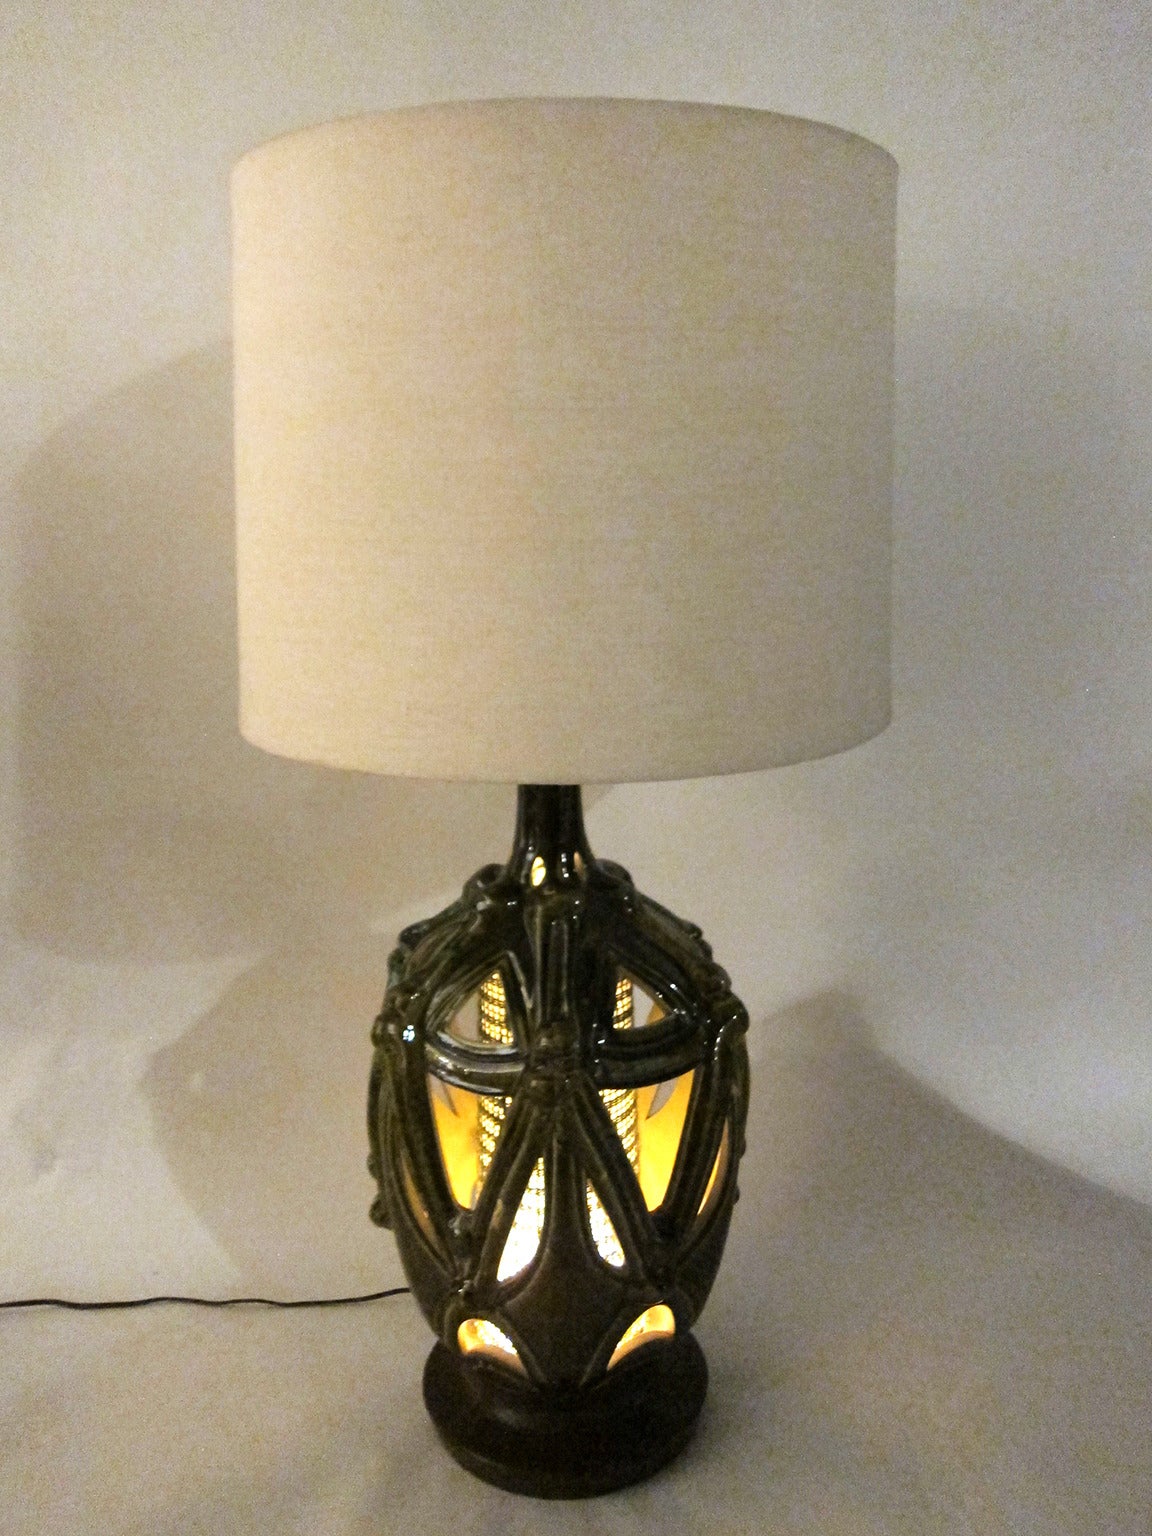 Pair of Midcentury Glazed Ceramic Table Lamps For Sale 5